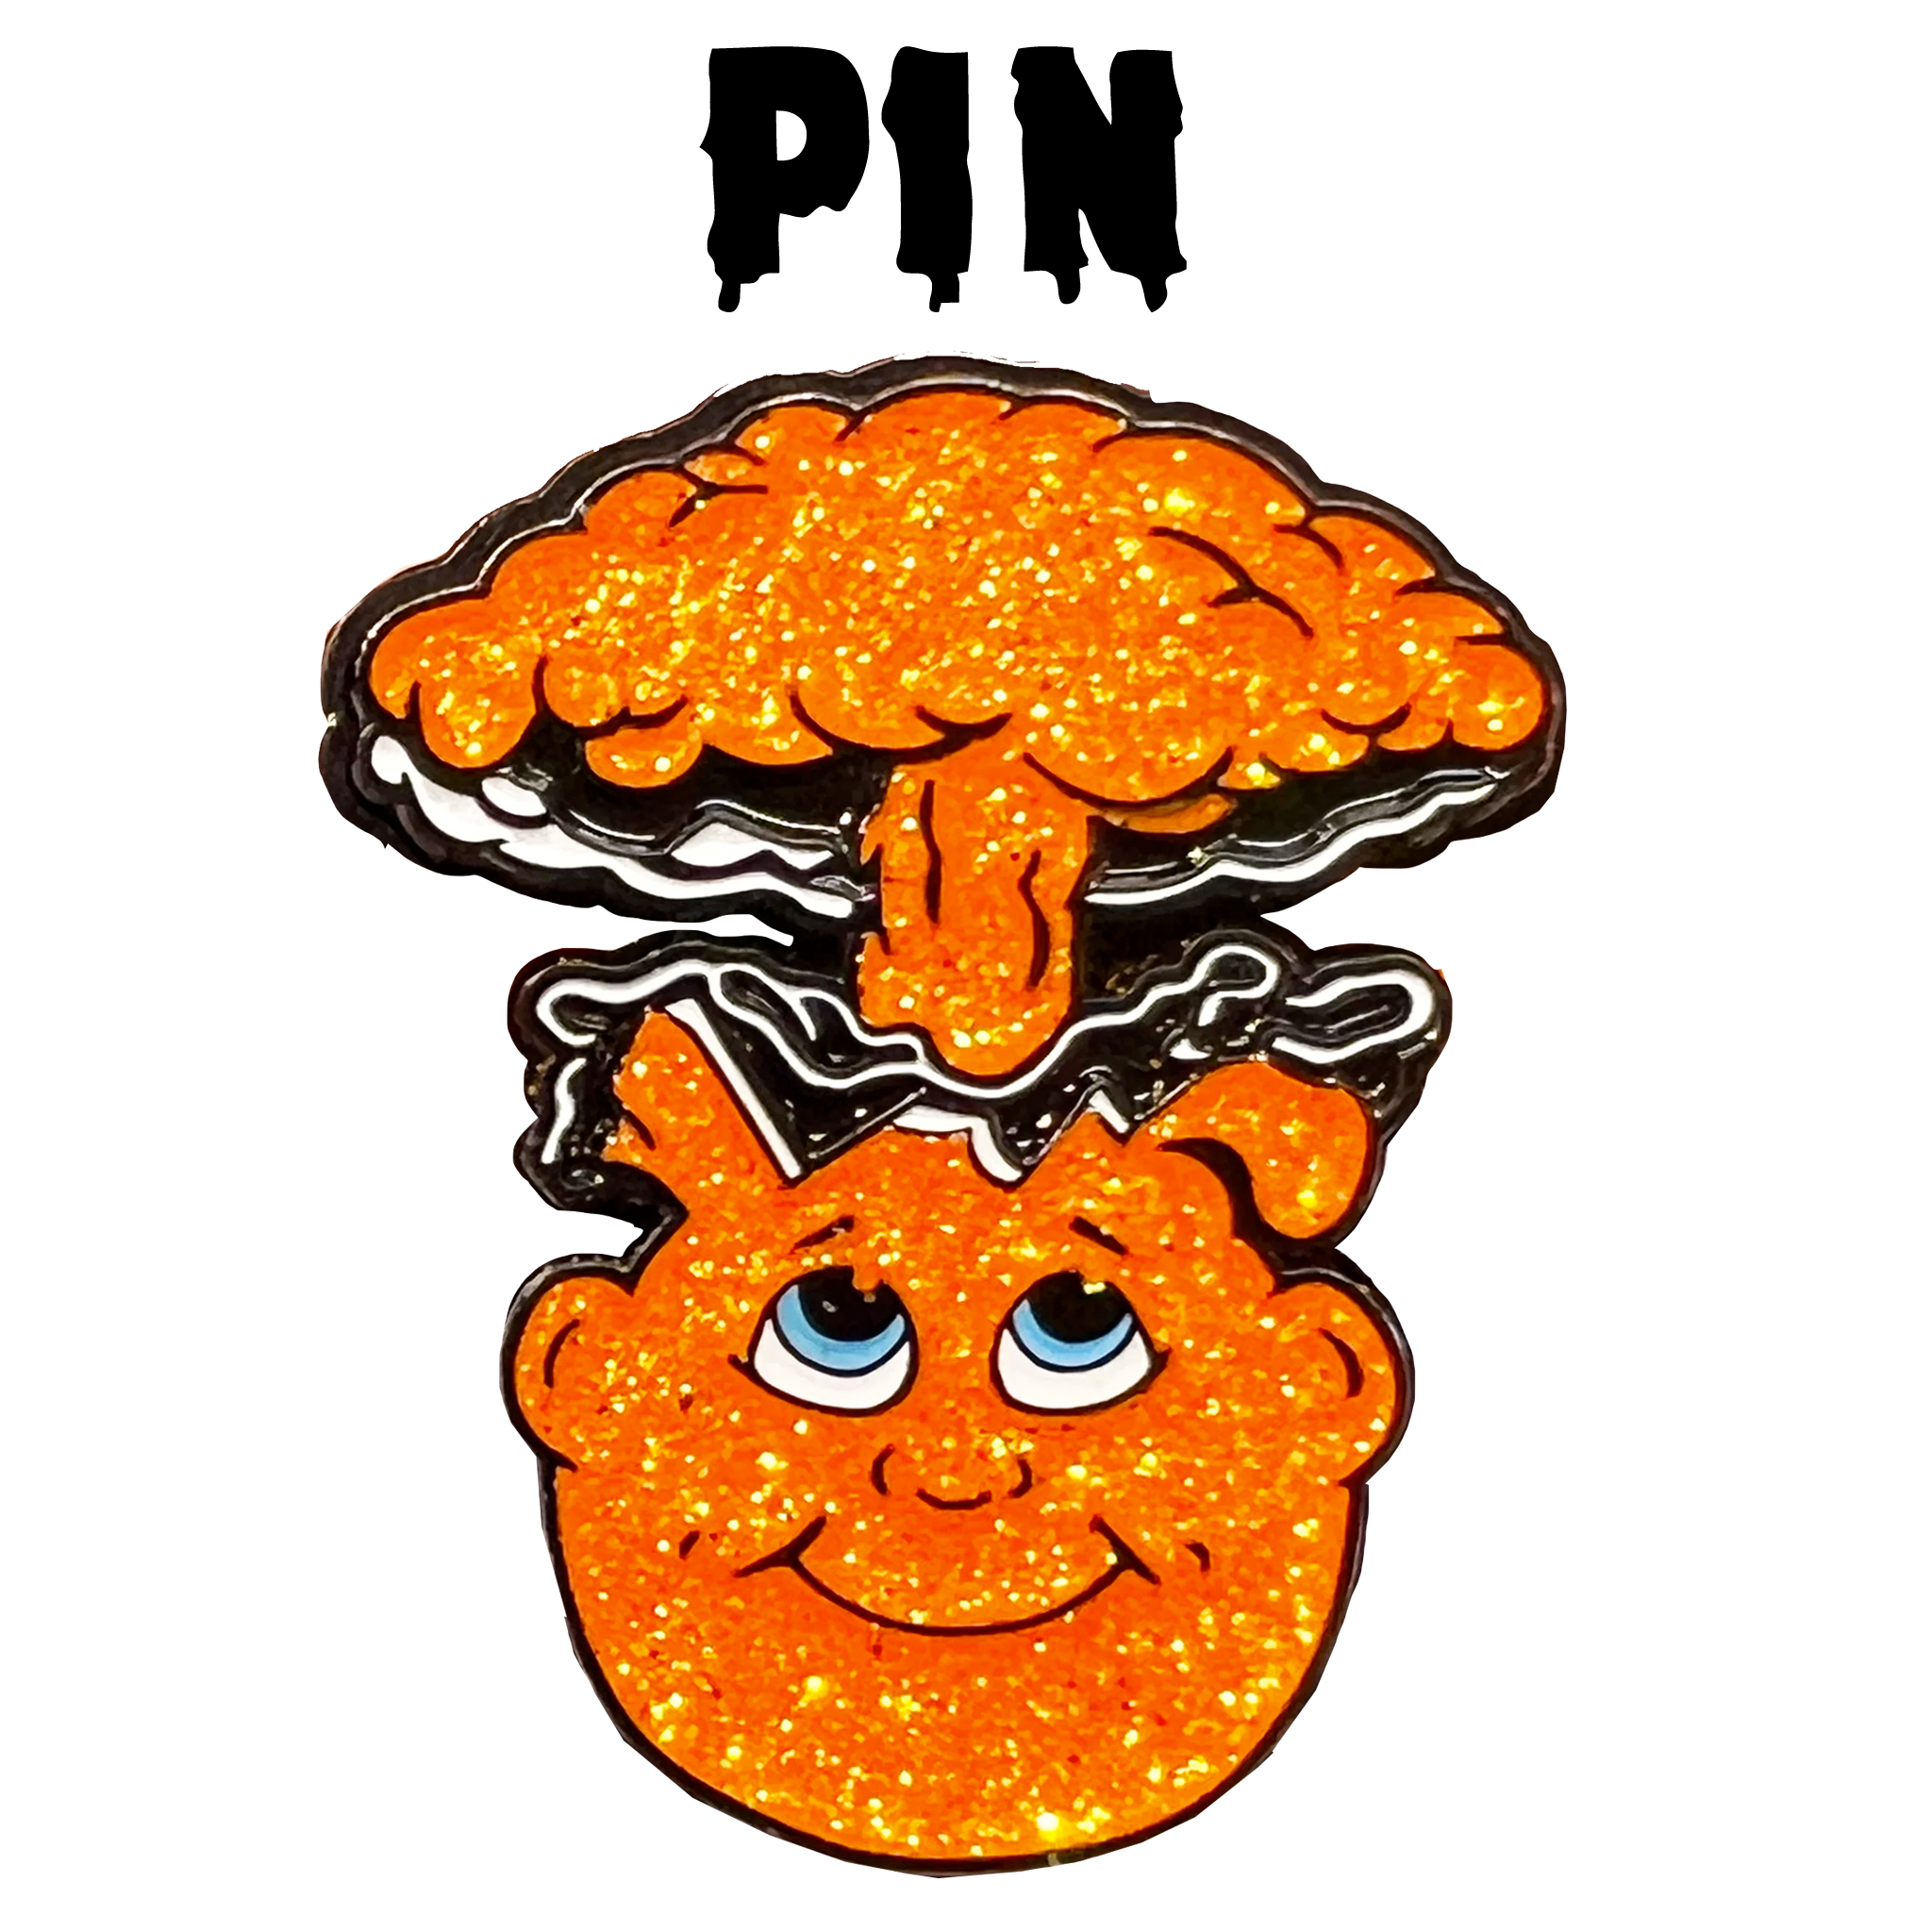 STRICT 1 PIN LIMIT: Orange Glitter Adam Bomb pin: limited to 5 pieces with individual serial number